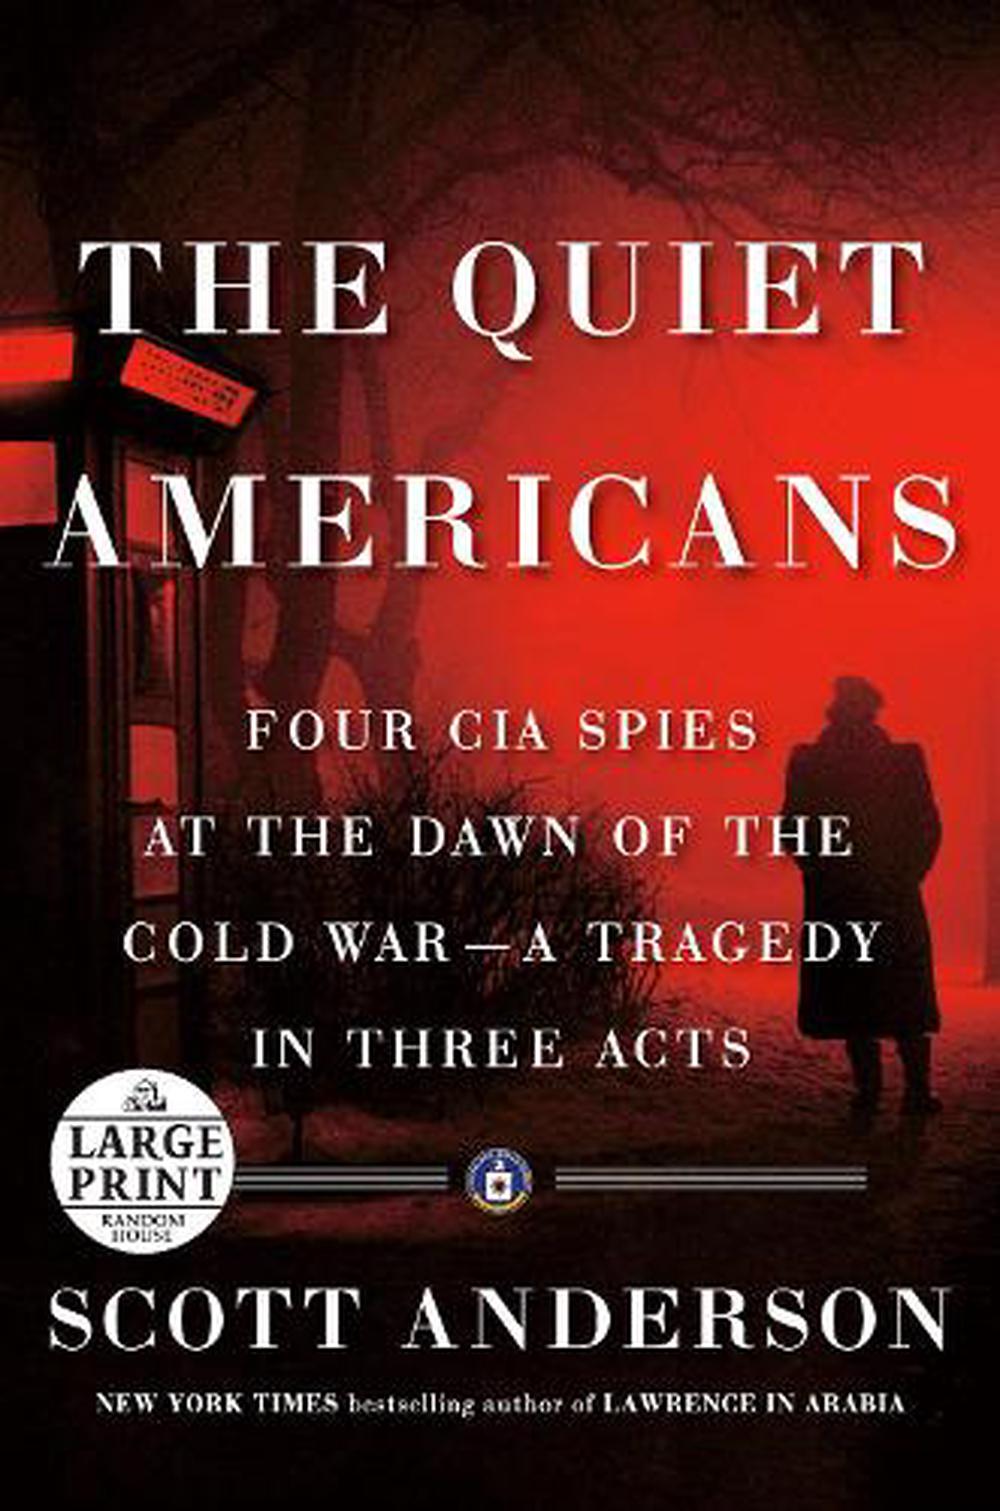 book the quiet americans